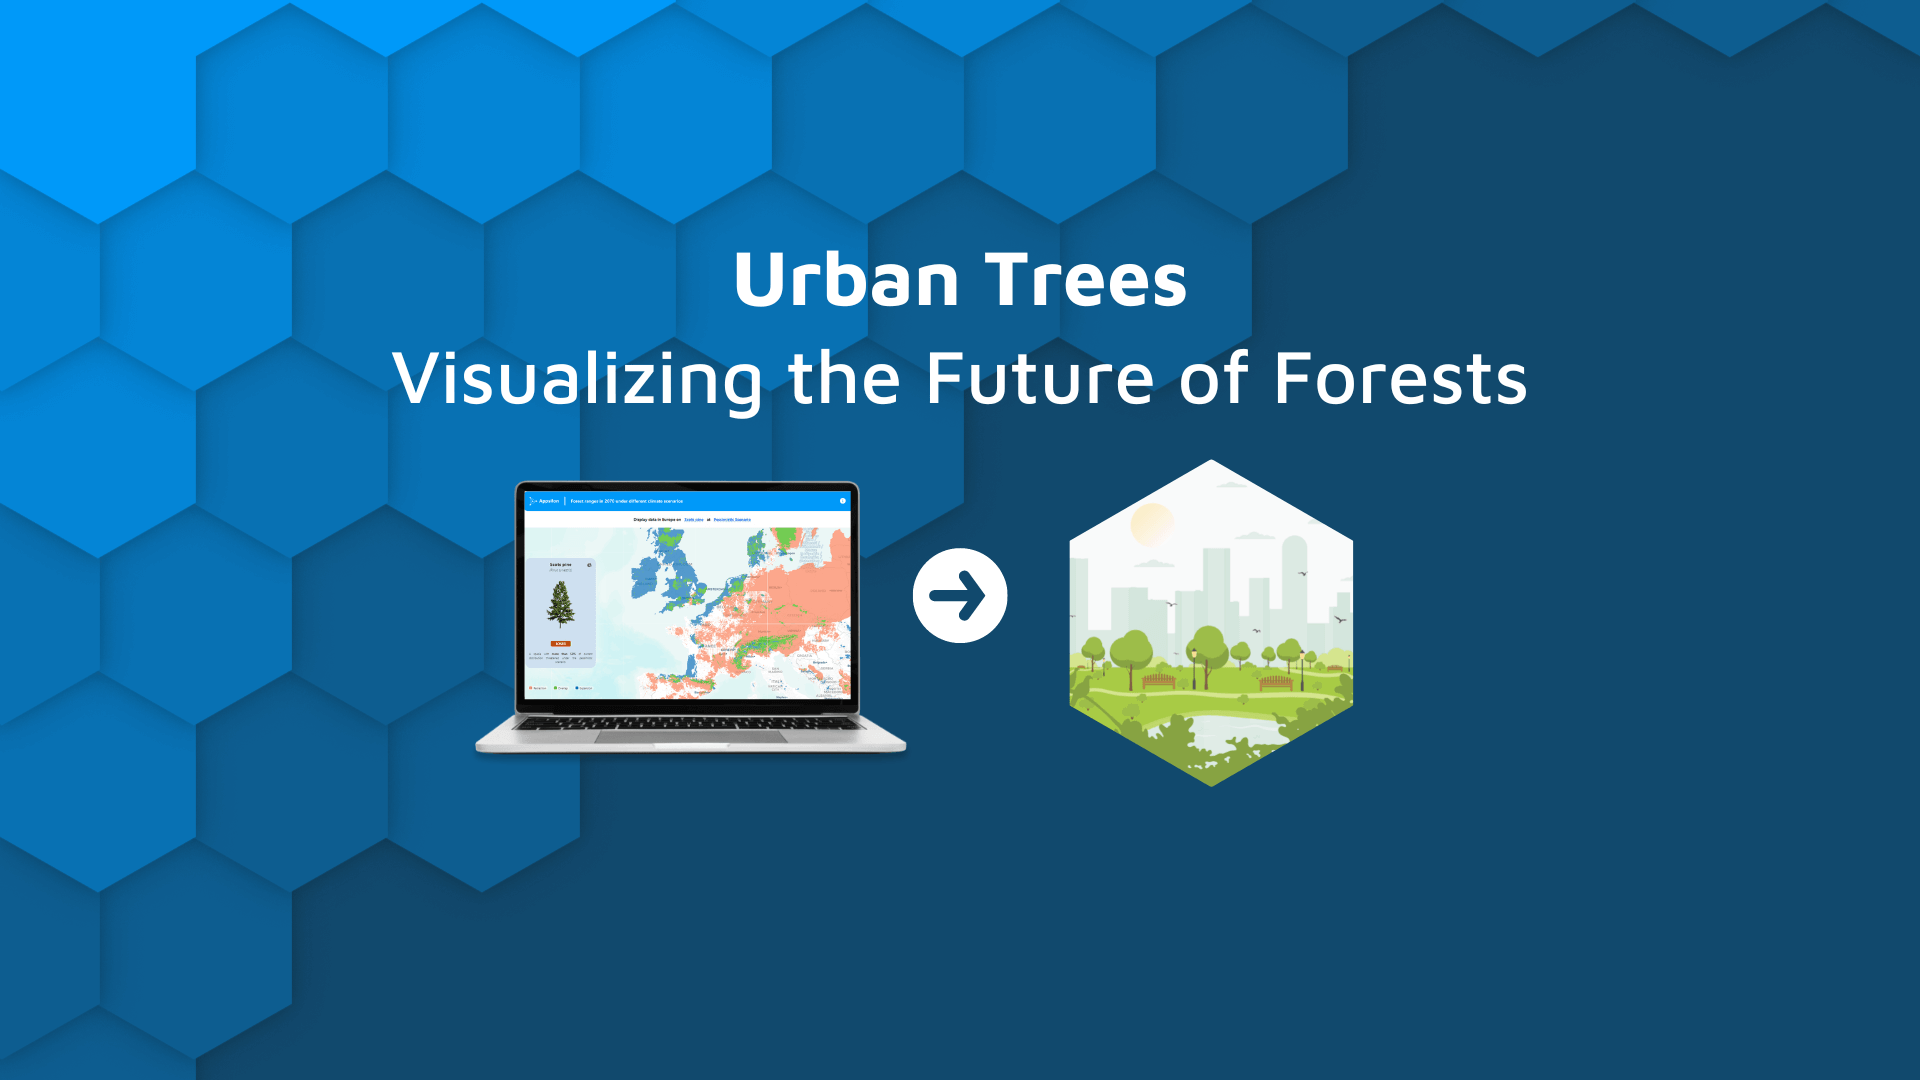 Urban Trees: Visualizing the Future of Forests